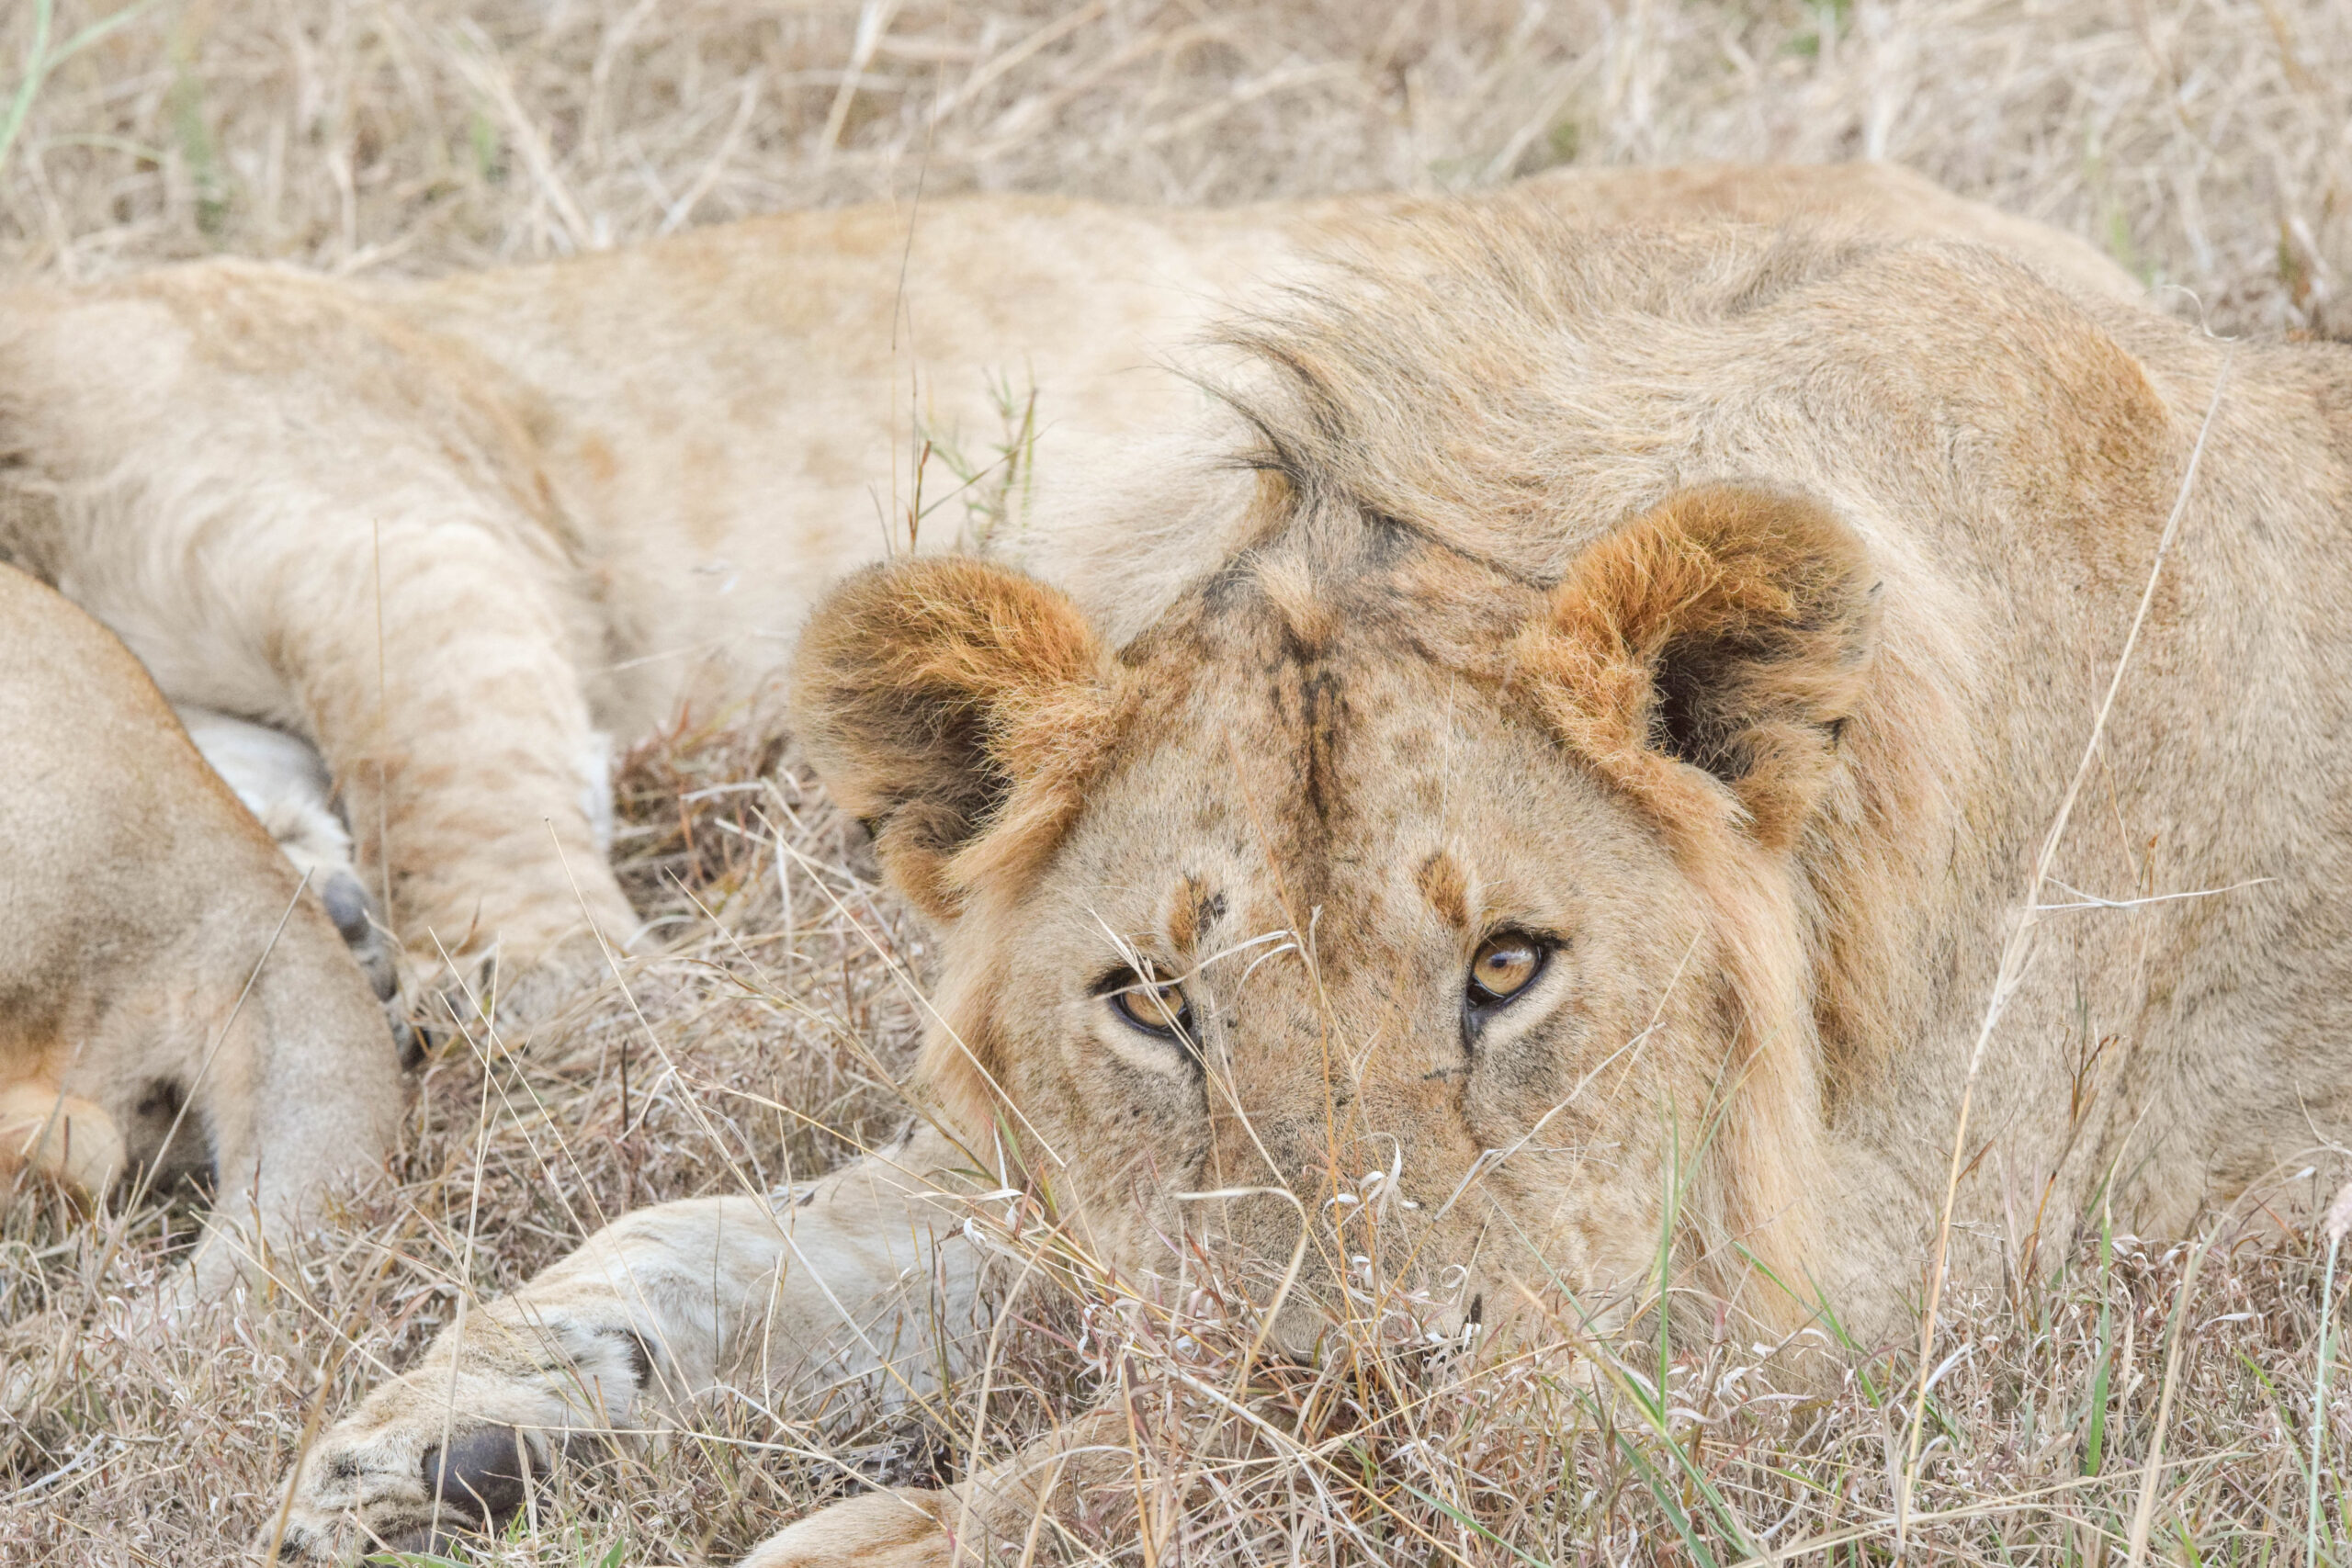 Lions In Kenya - Dreaming after a safari in Kenya? Here is my photo diary of the majestic lions (and lionesses) of Kenya! | Kenya Travel - African Wildlife - Safari Photography - Kenyan Wildlife